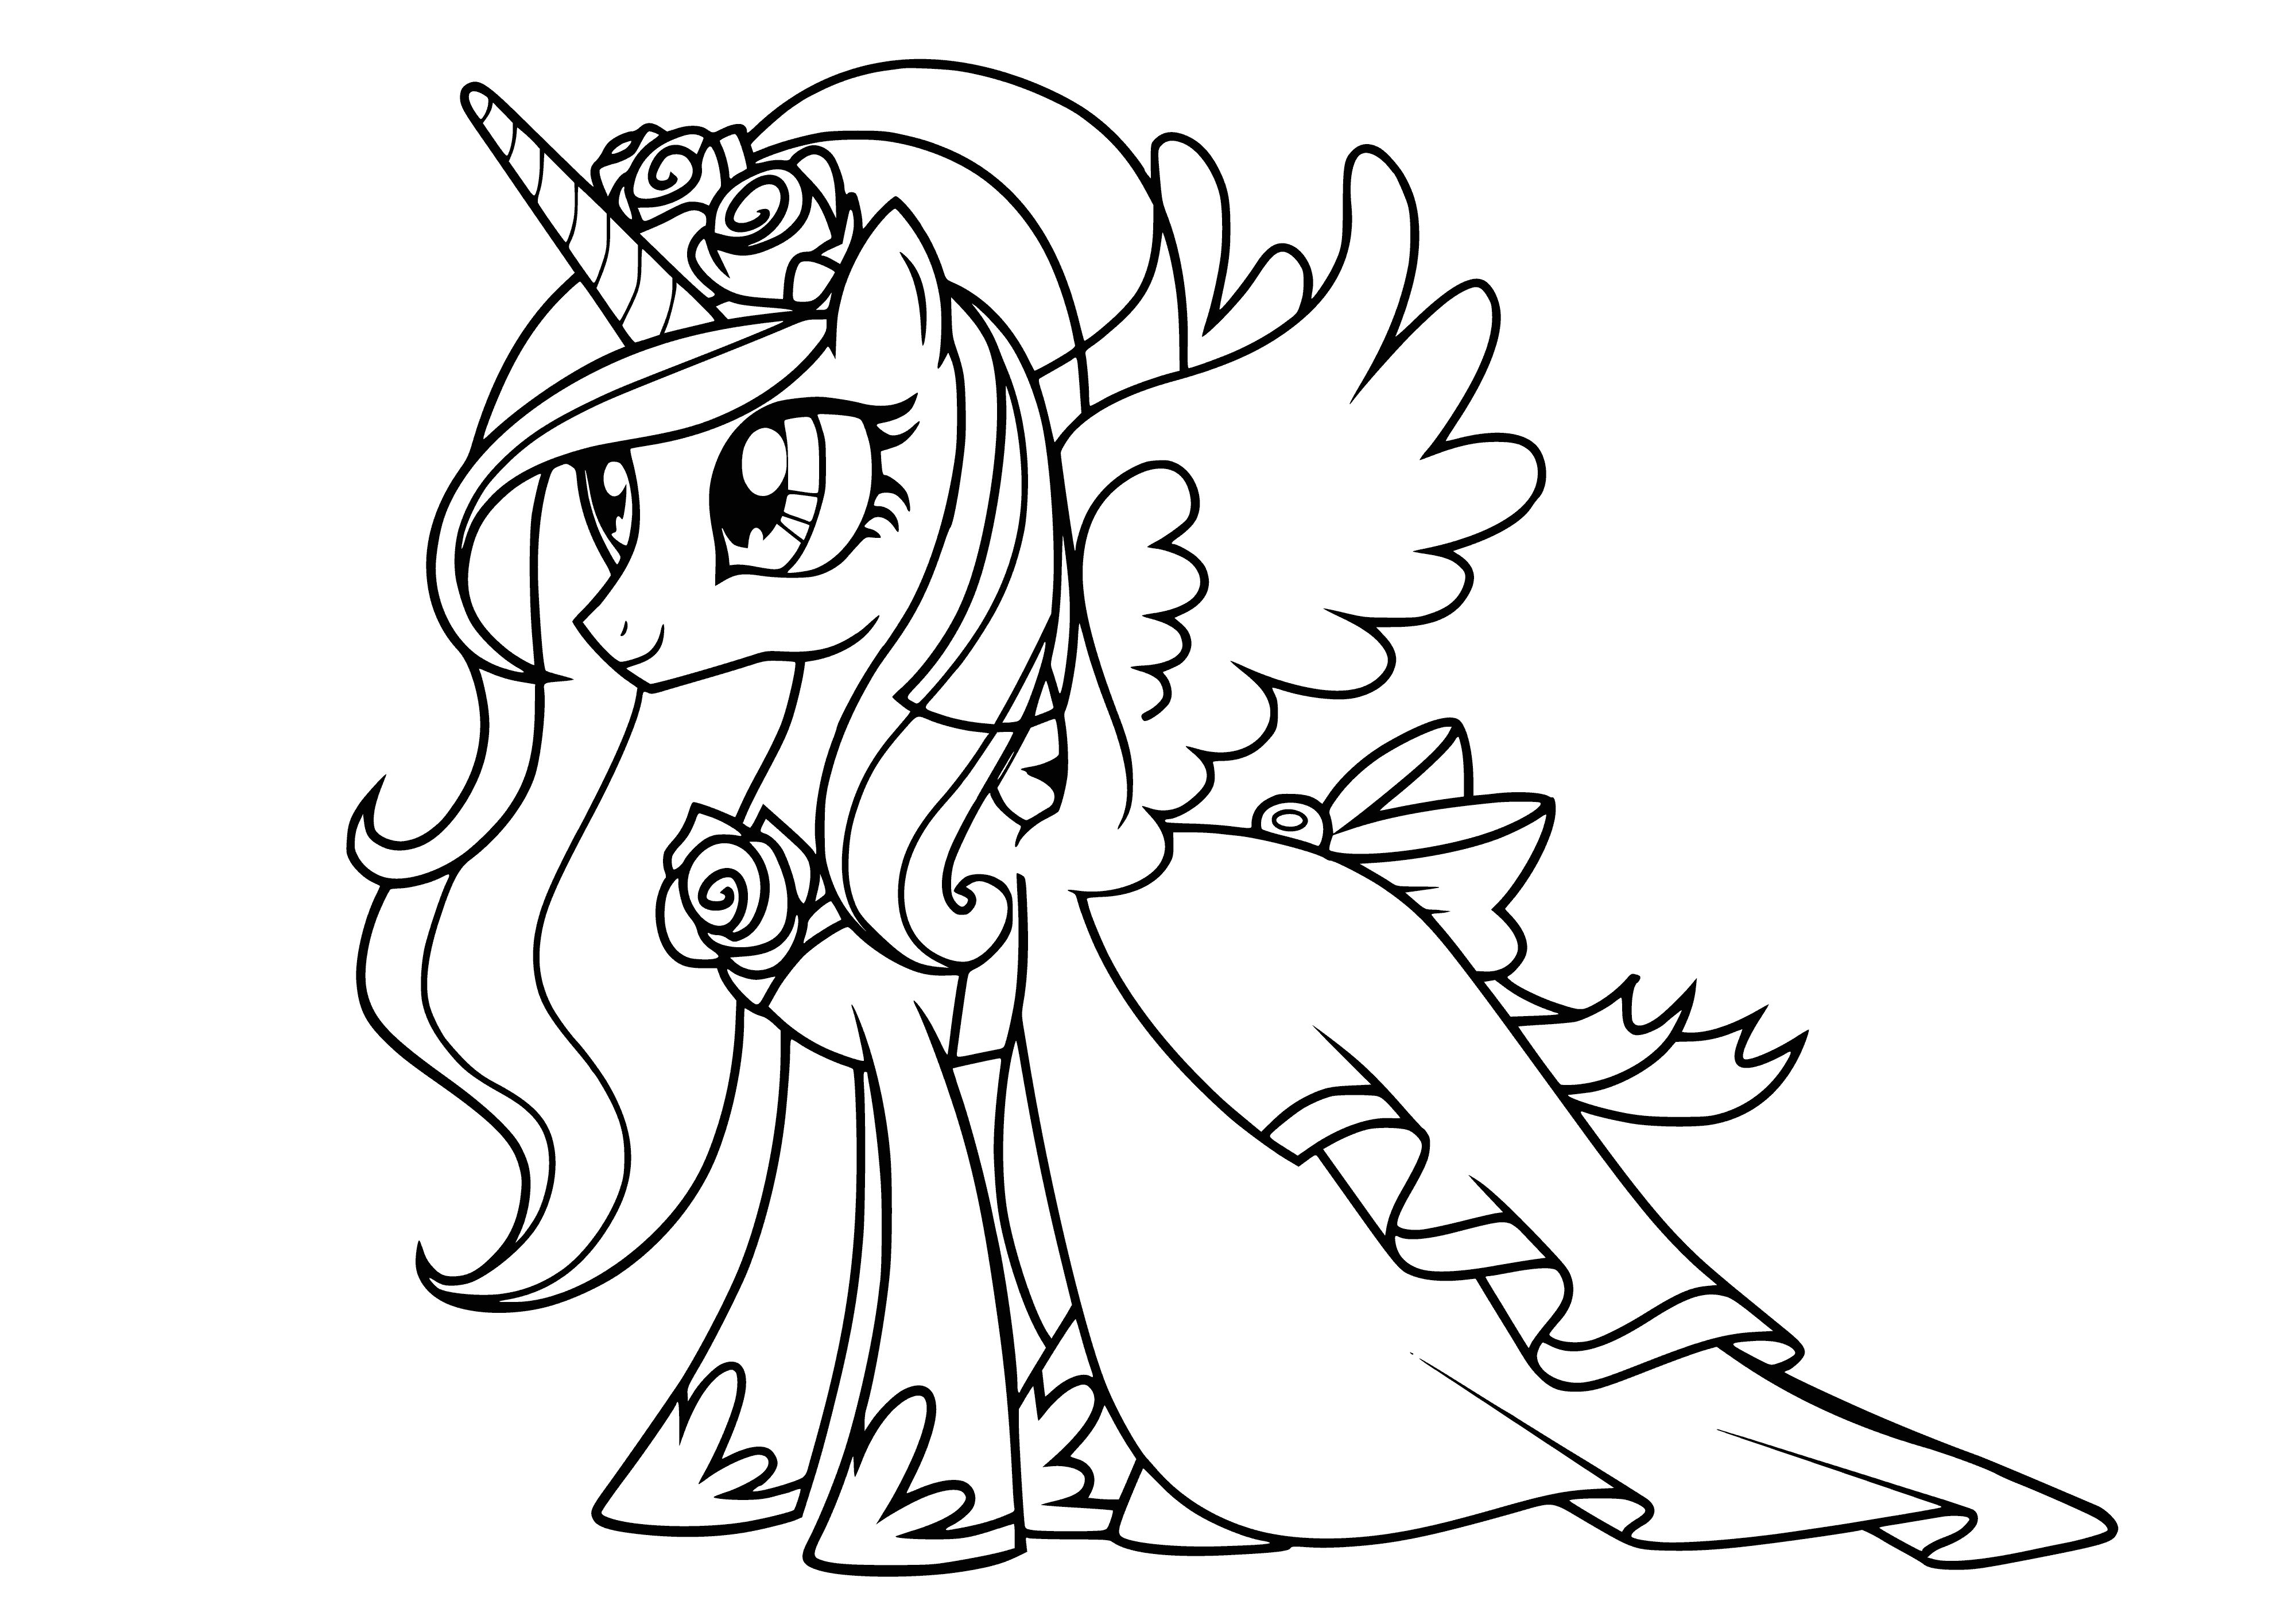 coloring page: Blonde princess with pink dress, crown, wand, and smile on face in coloring page.